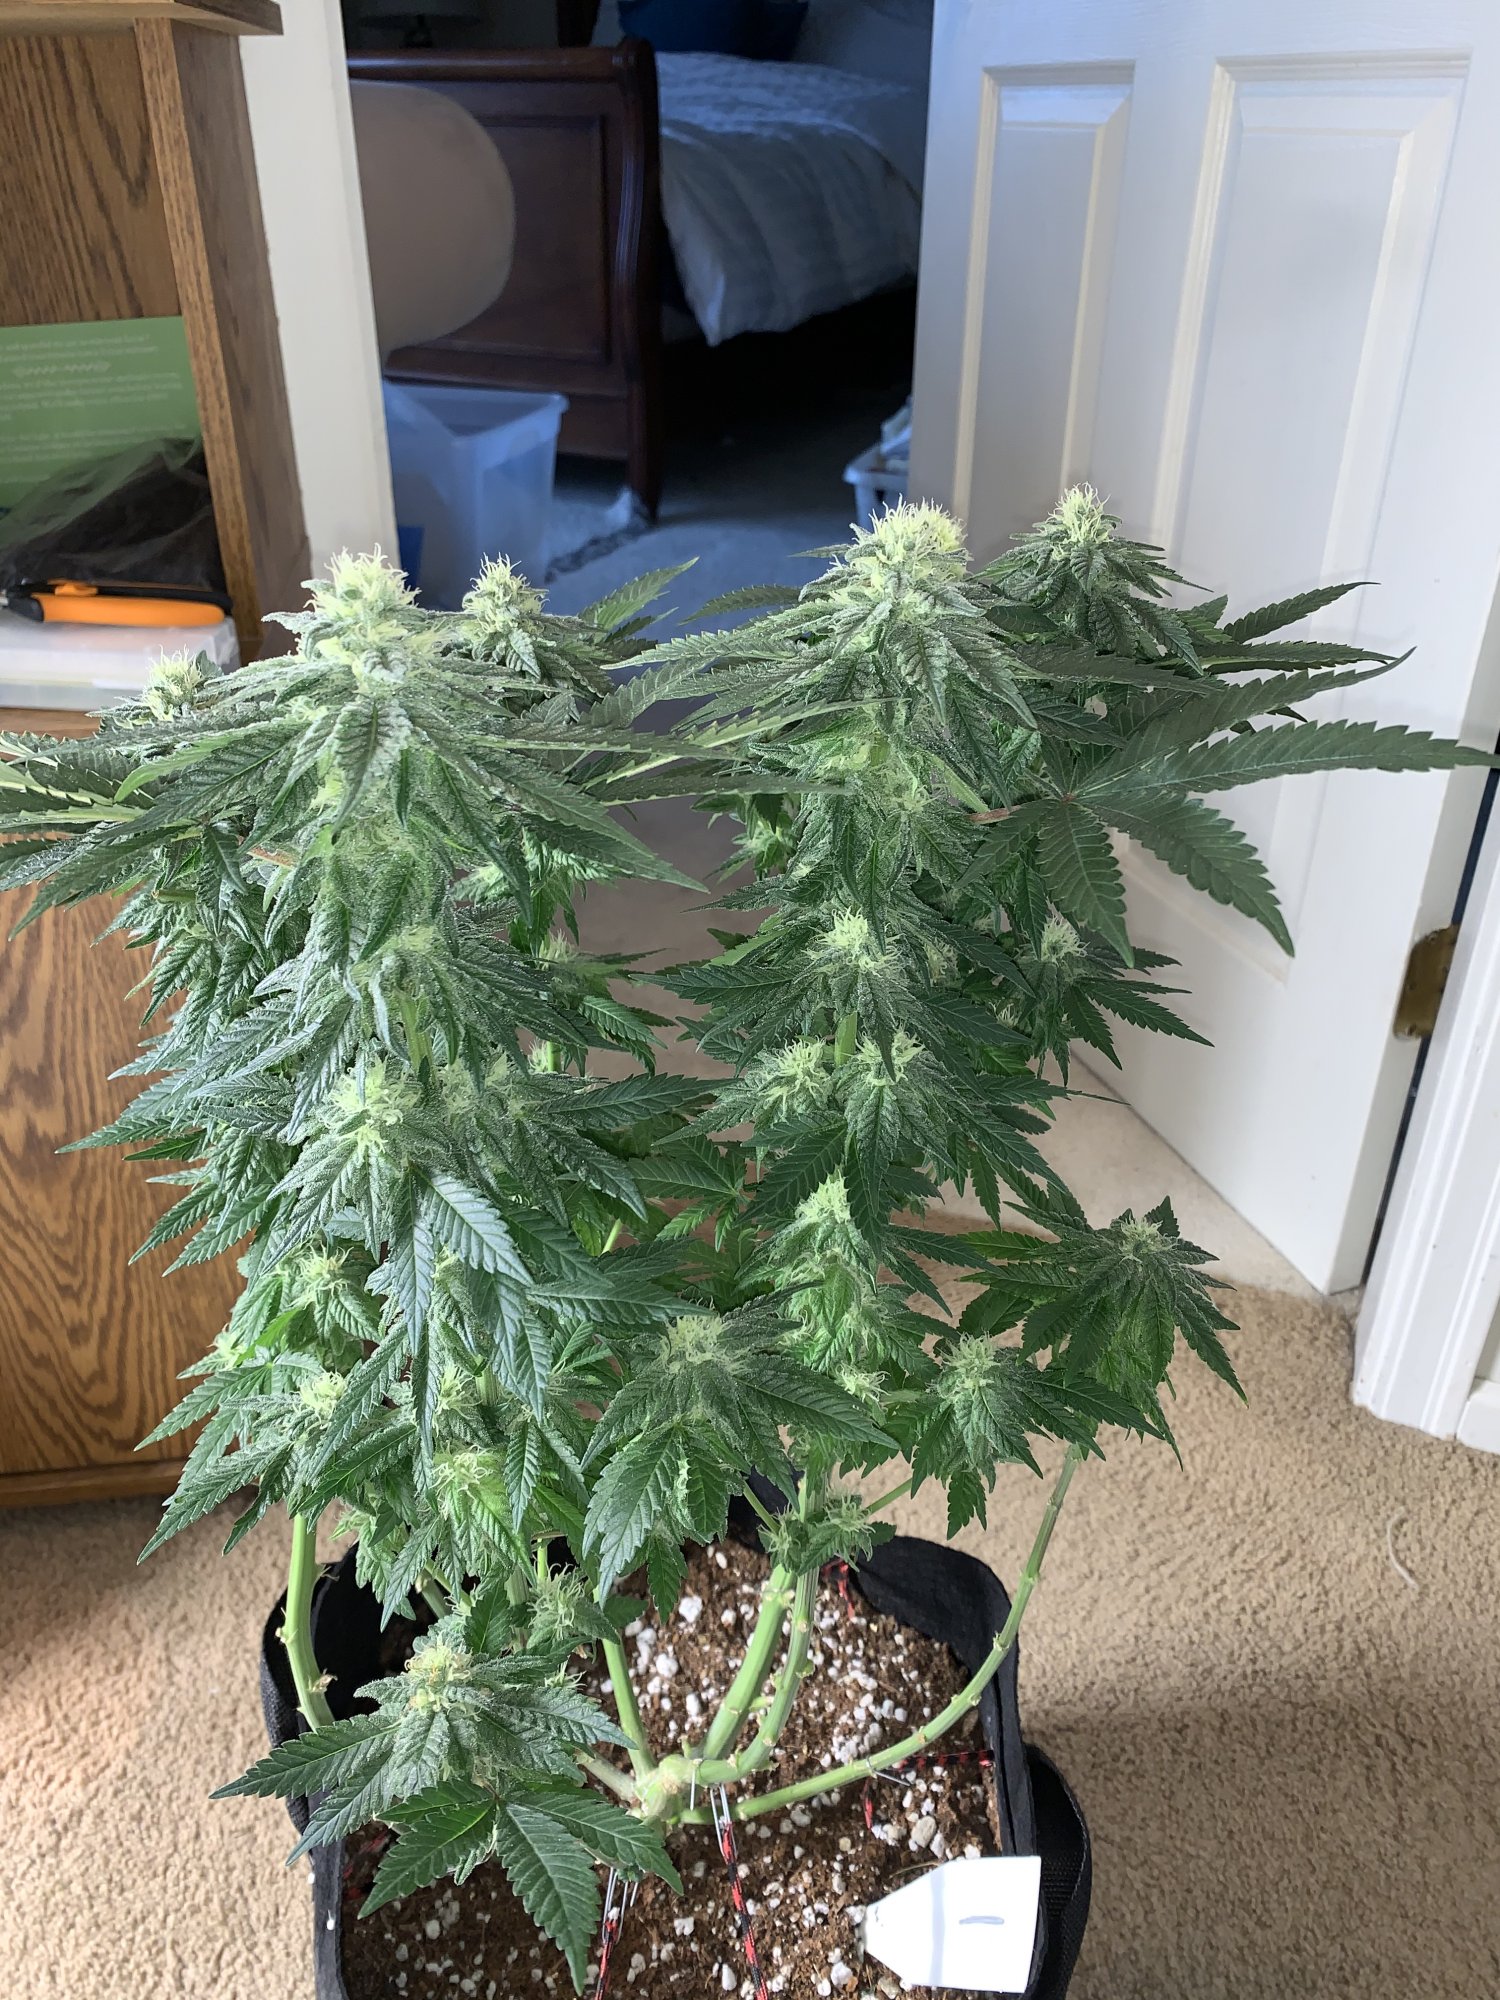 Andybois white widow flowering stage 6